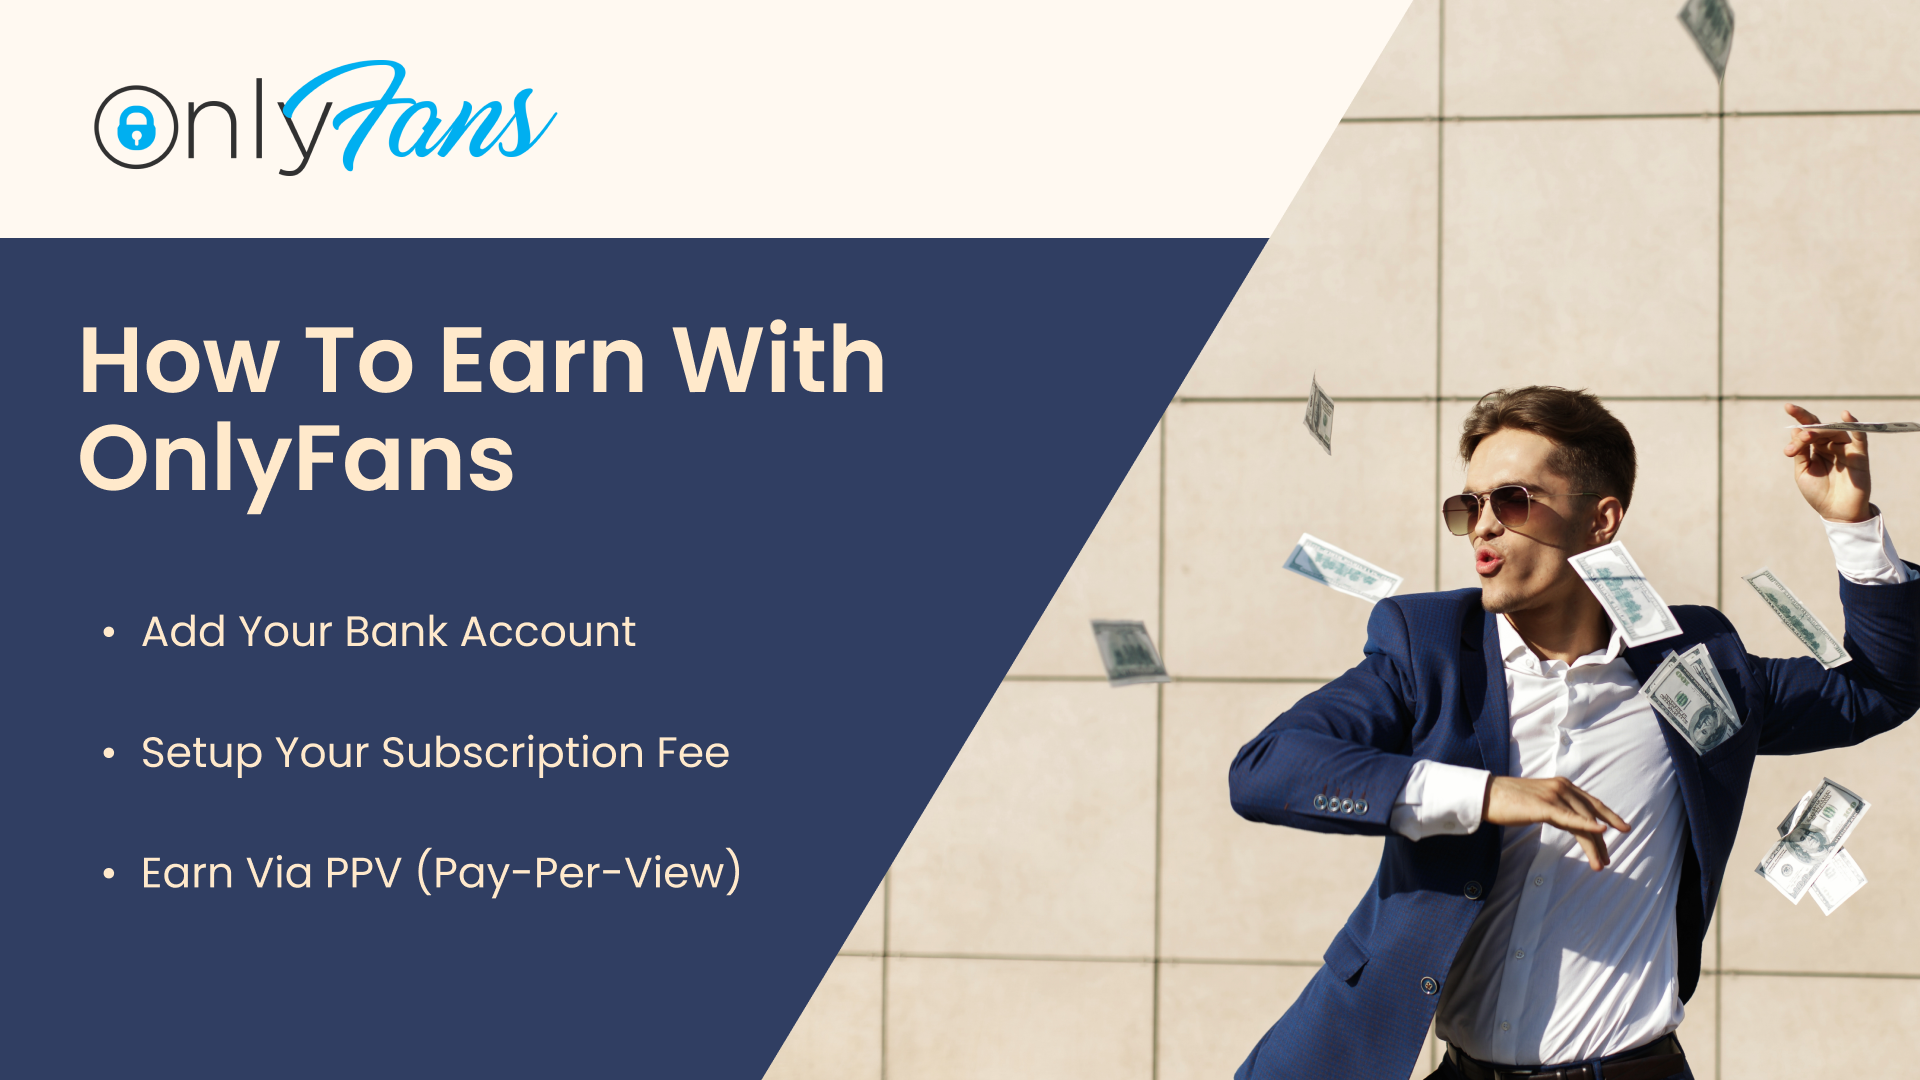 How to Earn With Onlyfans